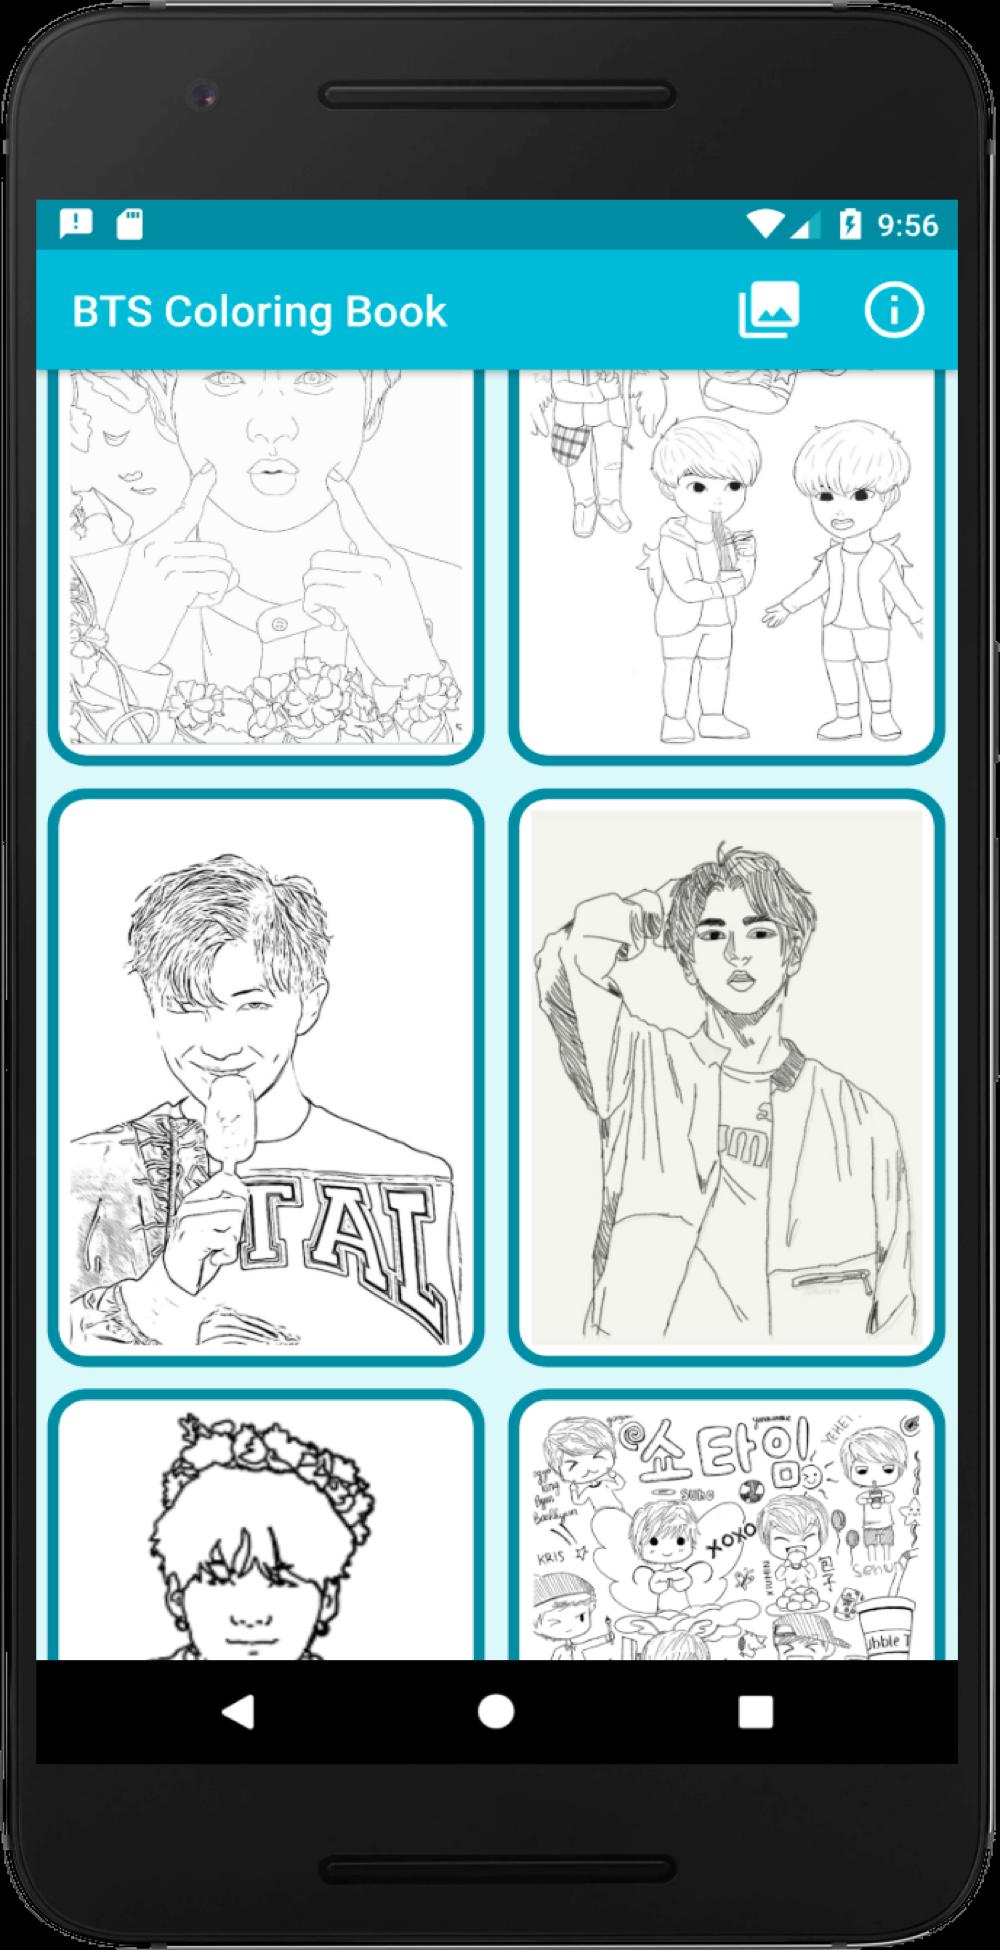 Bts K Pop Coloring Books For Android Apk Download - 